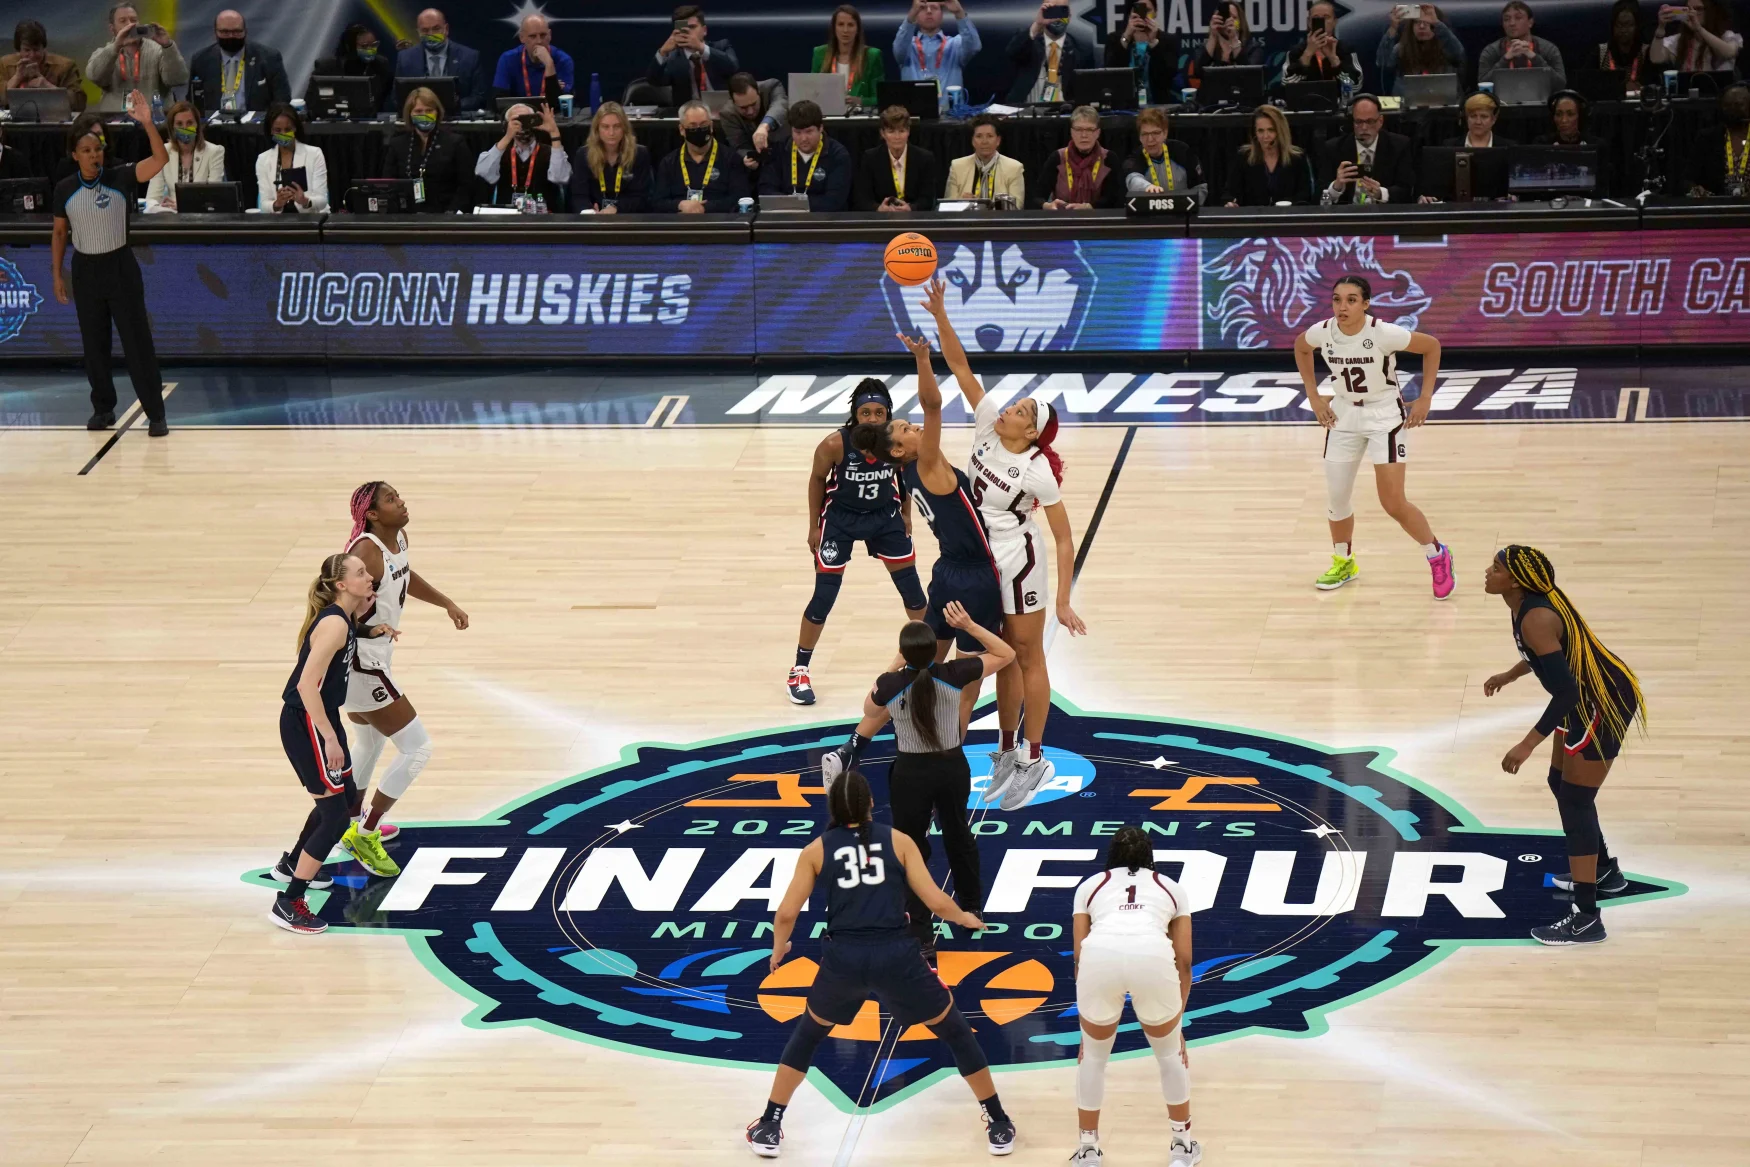 tech news Apr 3, 2022; Minneapolis, MN, USA; A general overall view of the opening tipoff between UConn Huskies forward Olivia Nelson-Ododa (20) and South Carolina Gamecocks forward Victaria Saxton (5) in the Final Four championship game of the women's college basketball NCAA Tournament at Target Center. South Carolina defeated UConn 64-49. Mandatory Credit: Kirby Lee-USA TODAY Sports